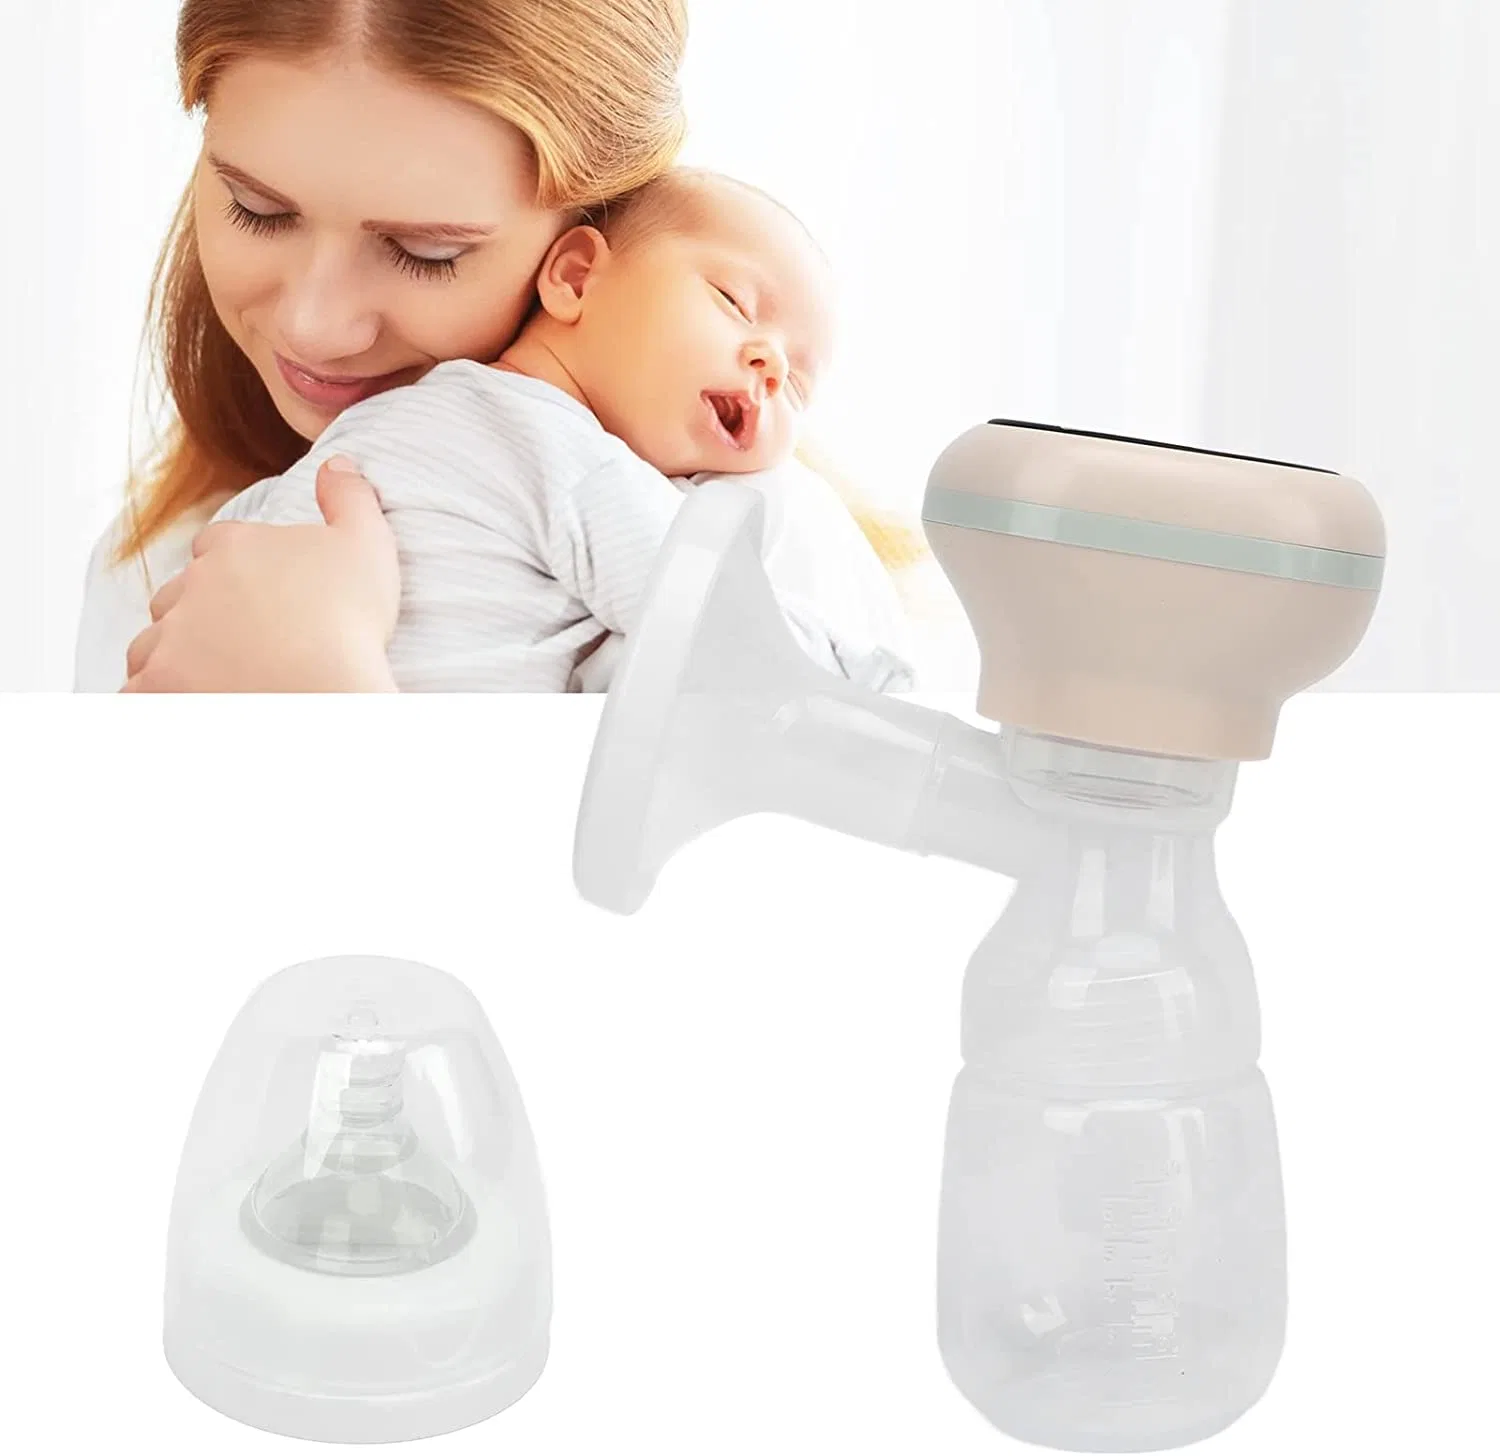 Electric Breast Pump with Soft and Comfortable Massage Cushion